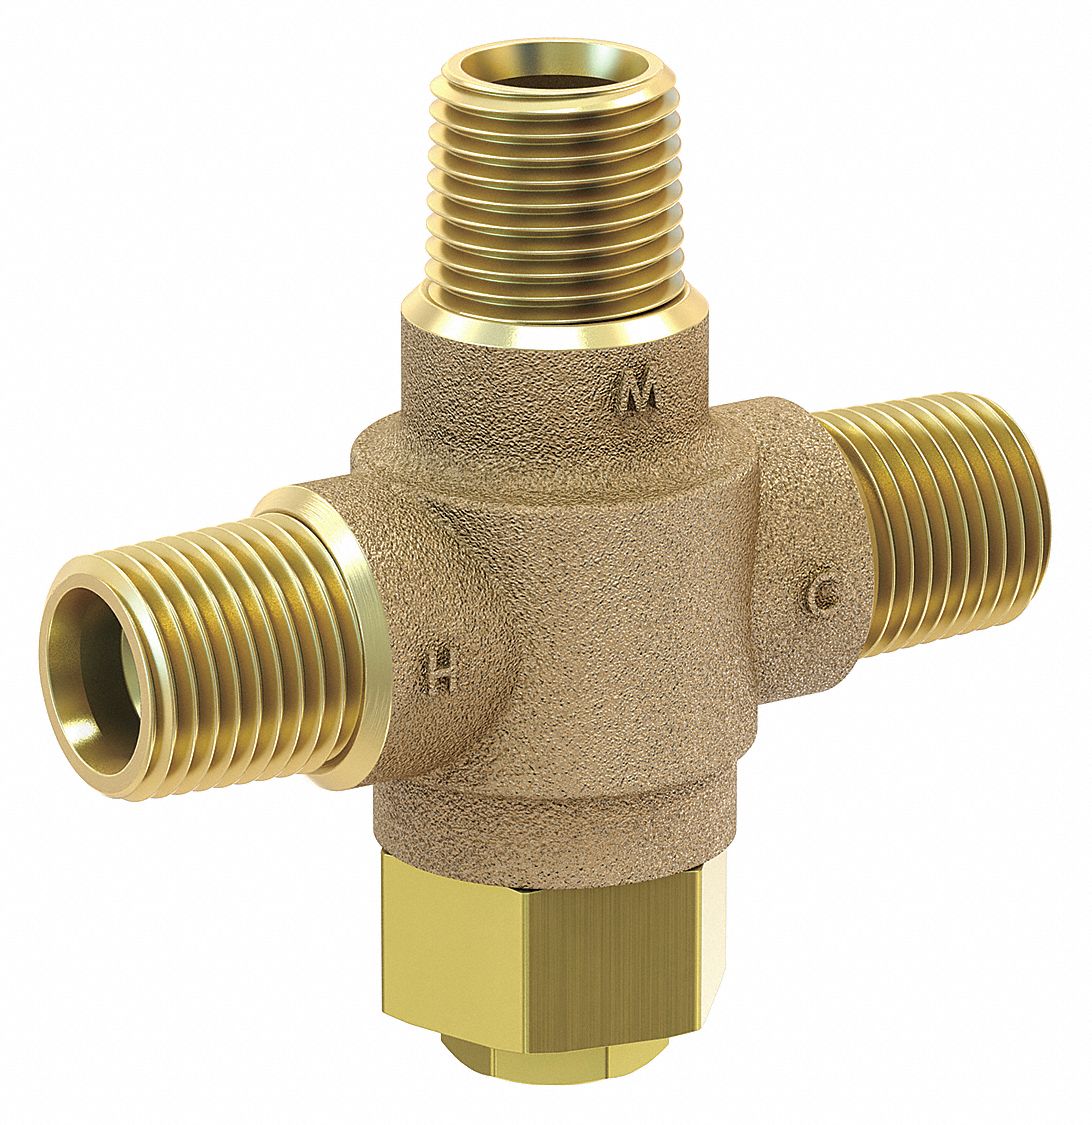 Tempering Valve: ST70, Brass, 1/2 in Inlet Size, NPT Inlet, 1/2 in Outlet Size